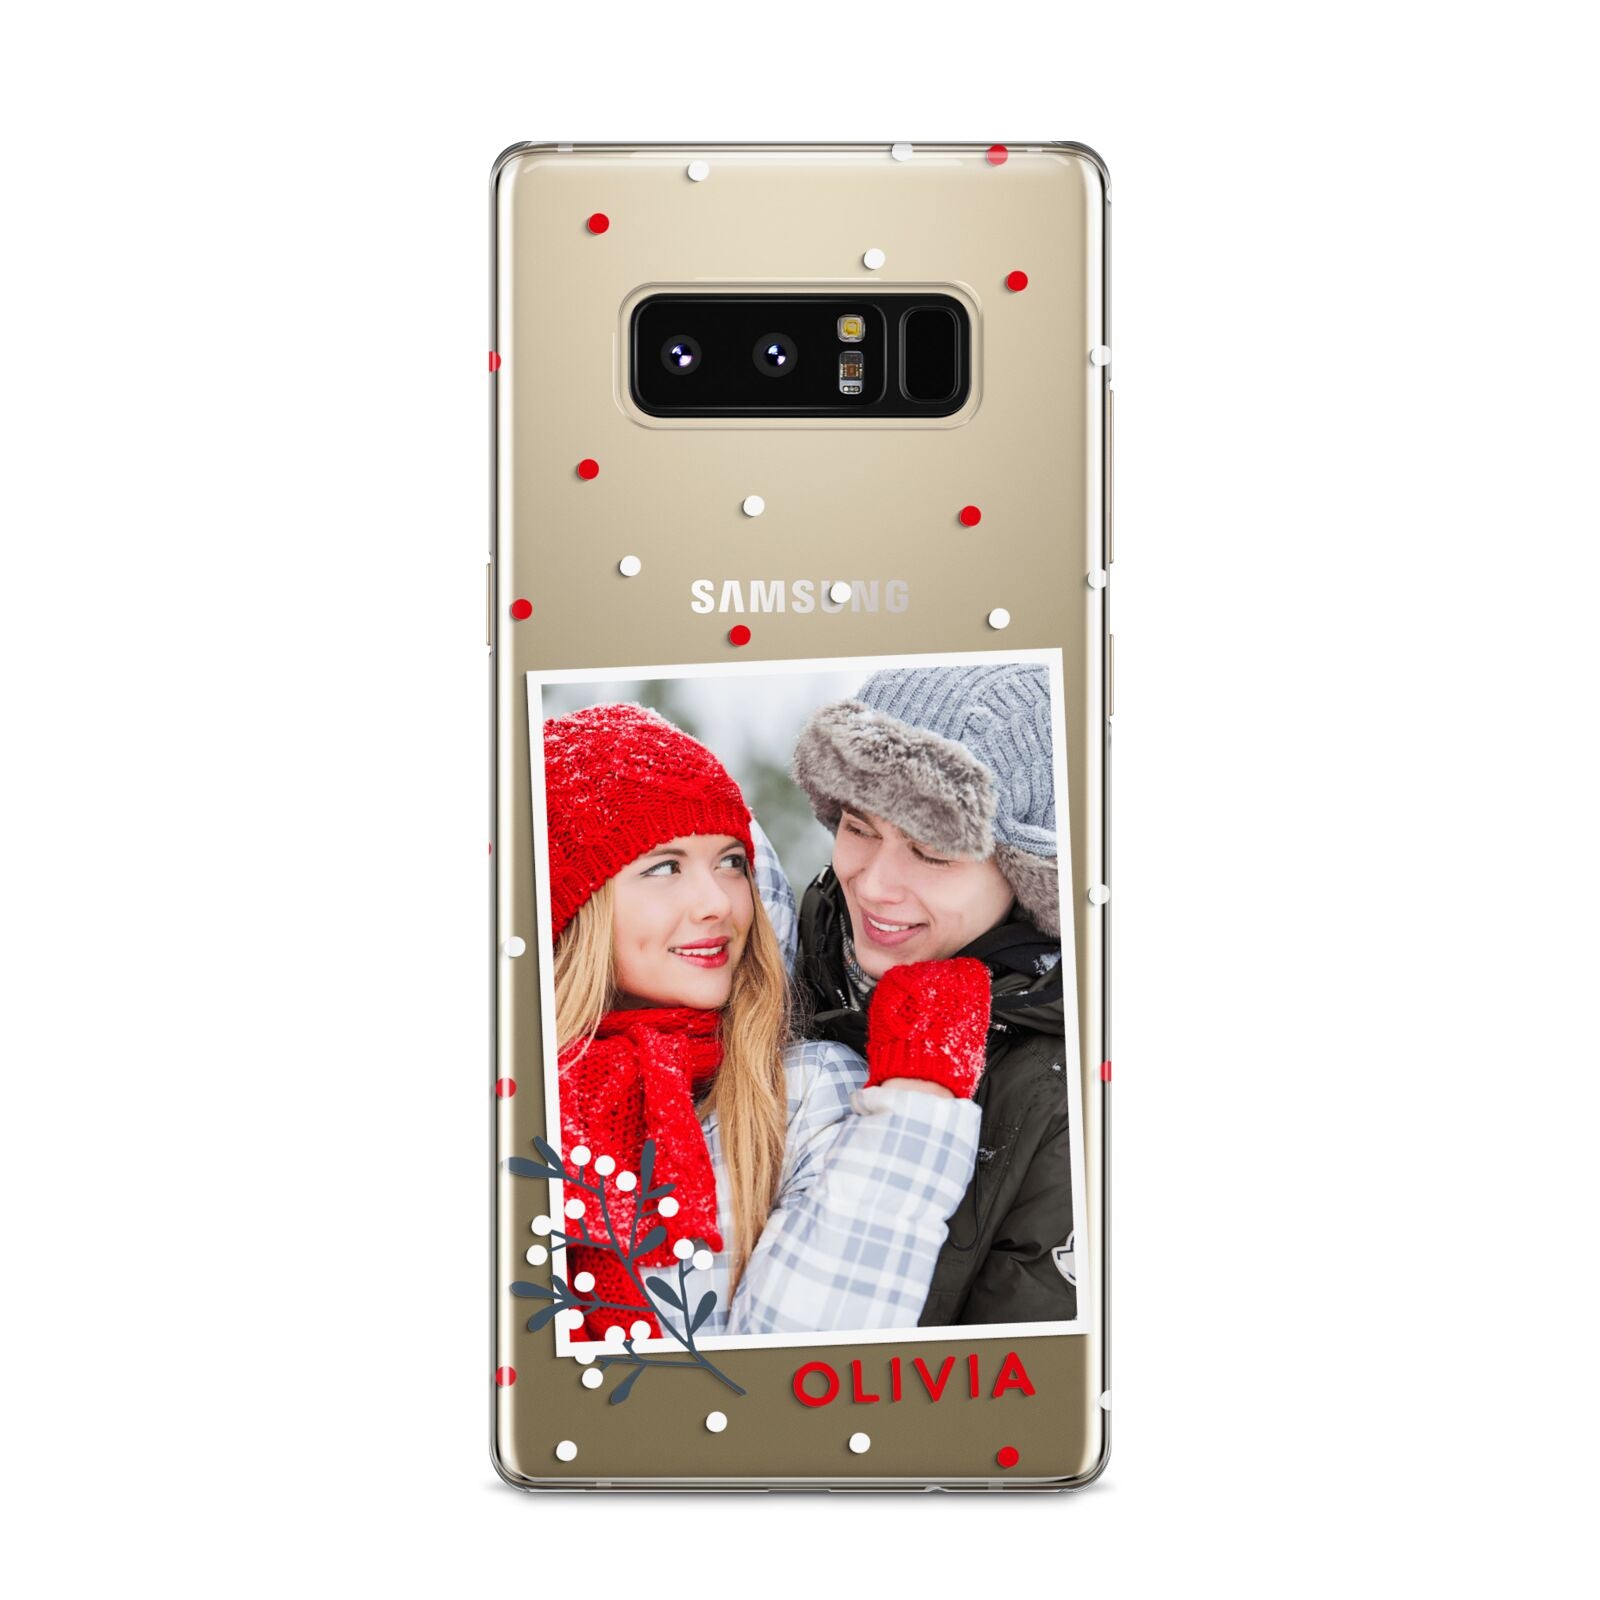 Christmas Personalised Photo Samsung Galaxy S8 Case